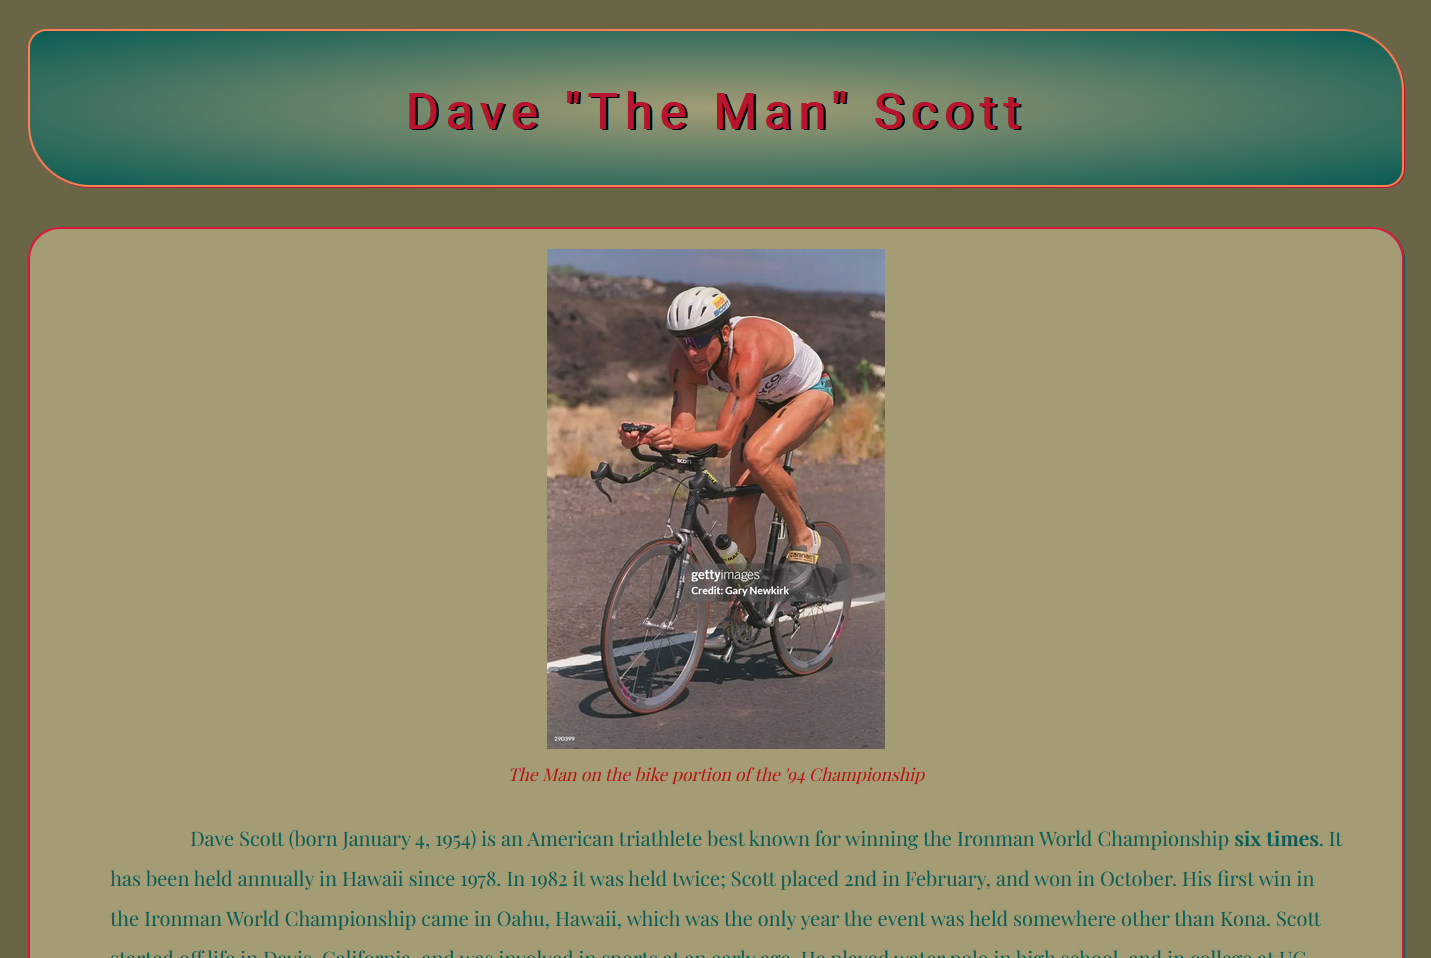 A tribute page to Dave Scott